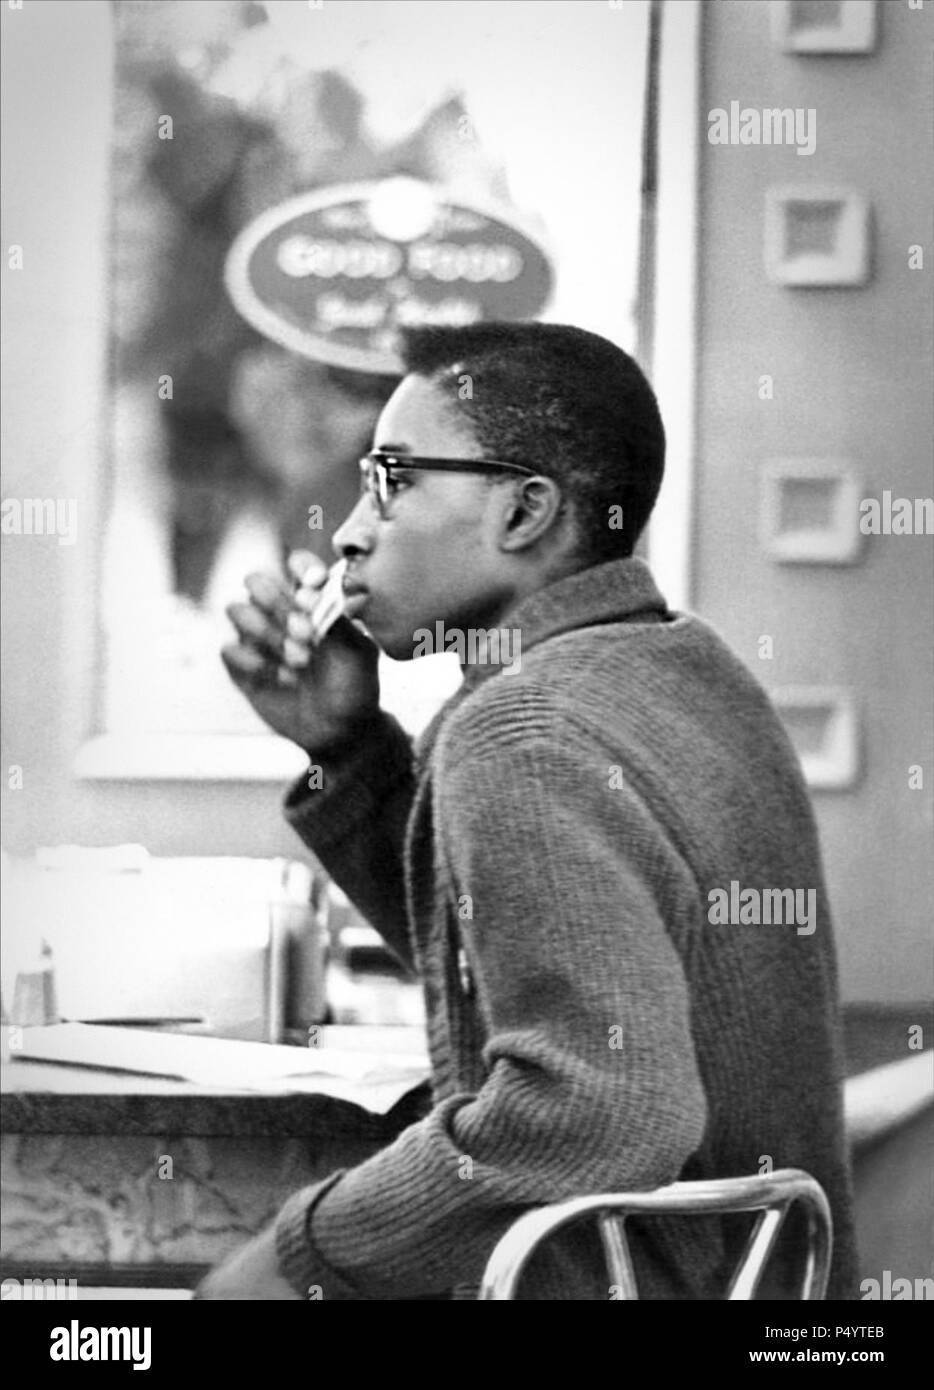 Benjamin Cowins during a sit-in at McCrory's lunch counter in Tallahassee, Florida on February 21, 1961. A group of Florida A&M students had been arrested a year earlier after a sit-in at a Tallahassee Woolworth's lunch counter. Stock Photo